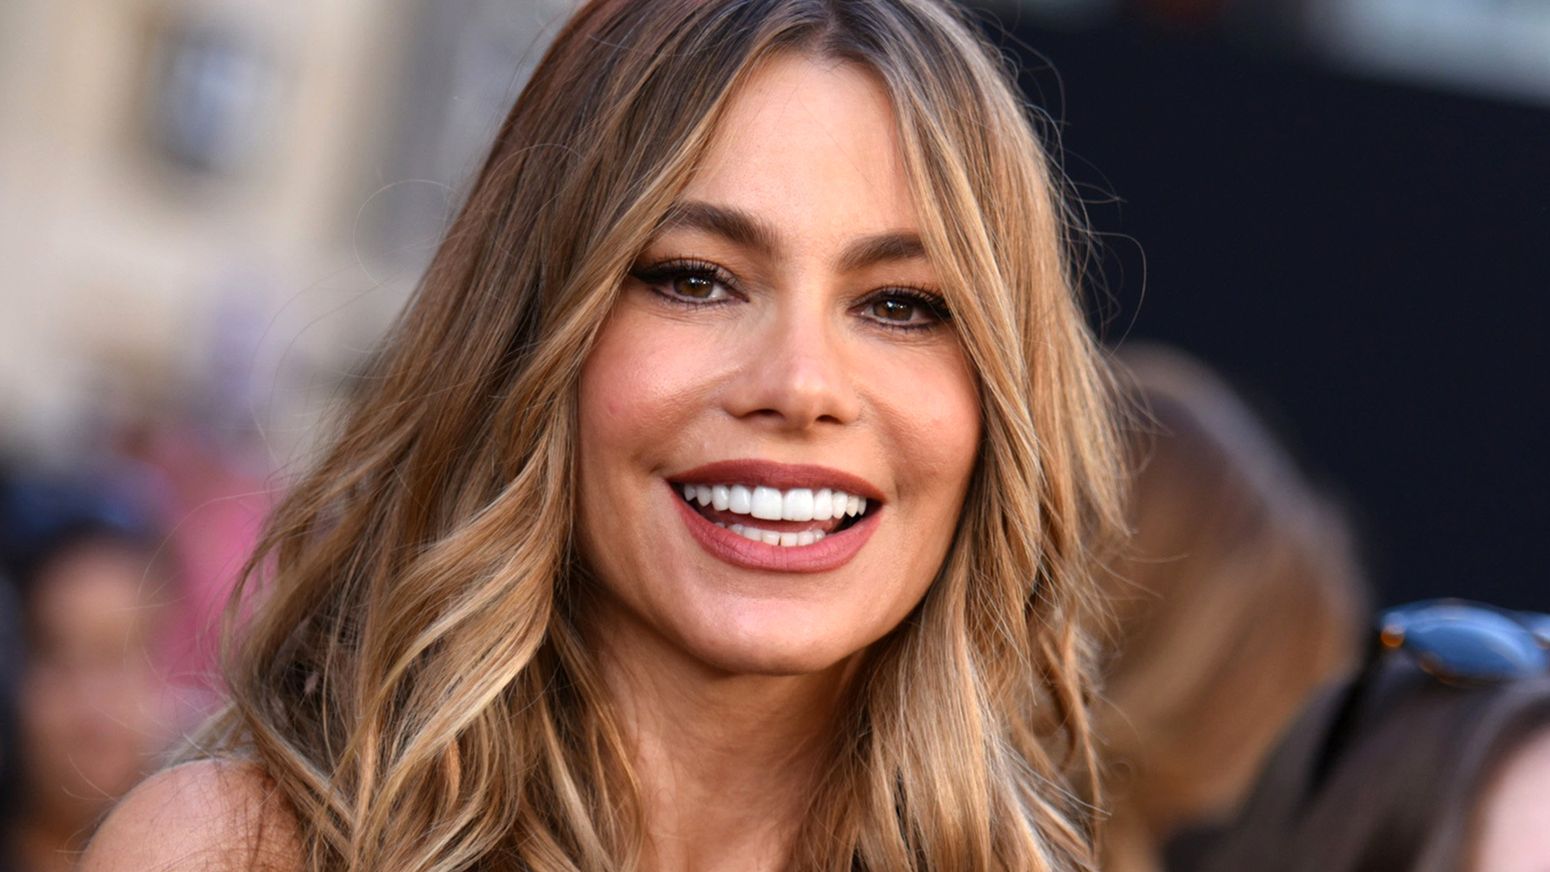 Reality Star Says Sofia Vergara Should Be Nicer To People Because She's